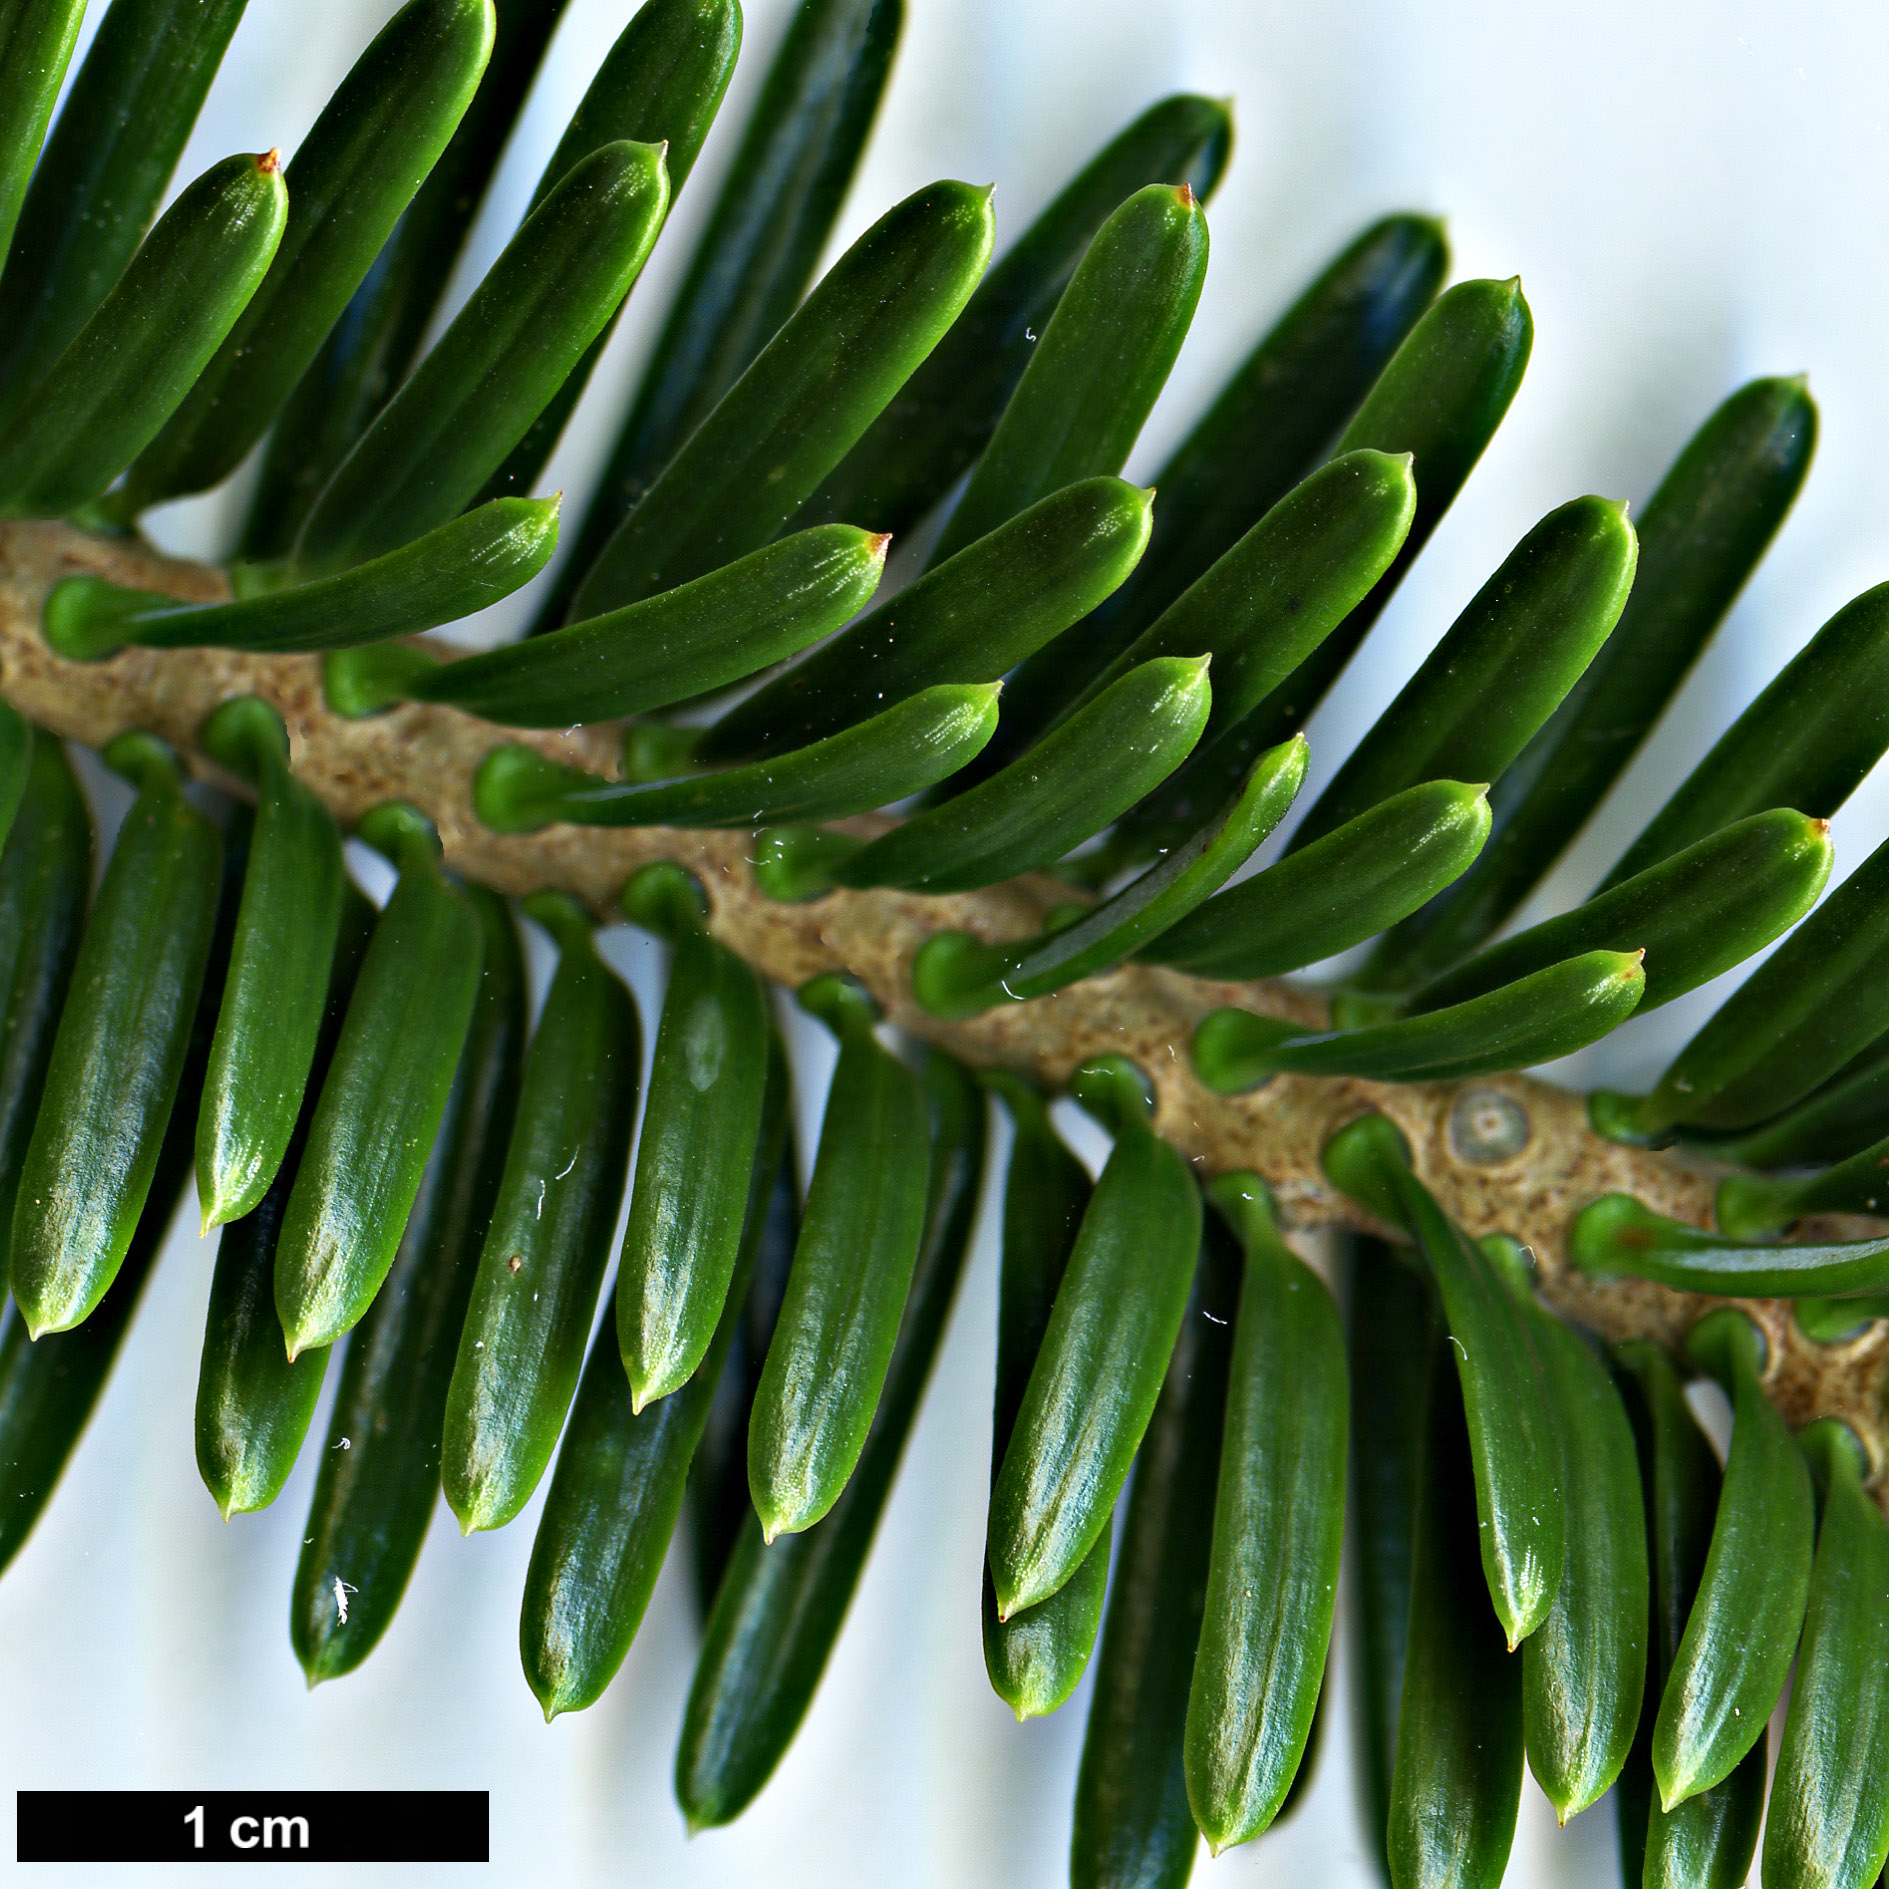 High resolution image: Family: Pinaceae - Genus: Abies - Taxon: nebrodensis